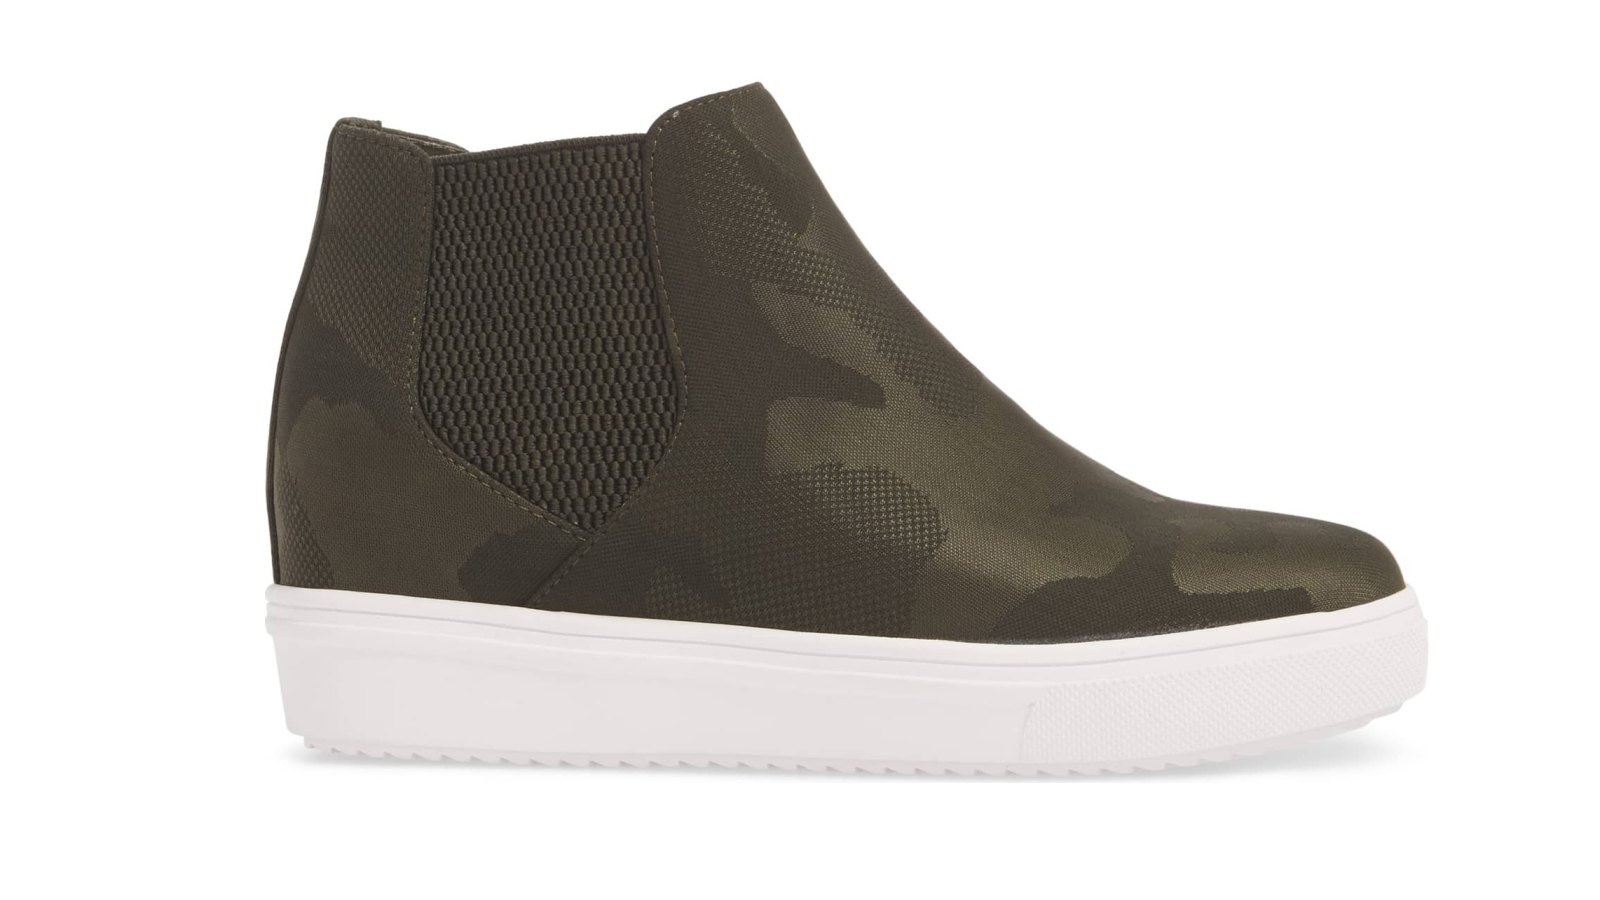 compañero ley Me gusta Shop Steve Madden Wedge Sneakers on Sale at Nordstrom